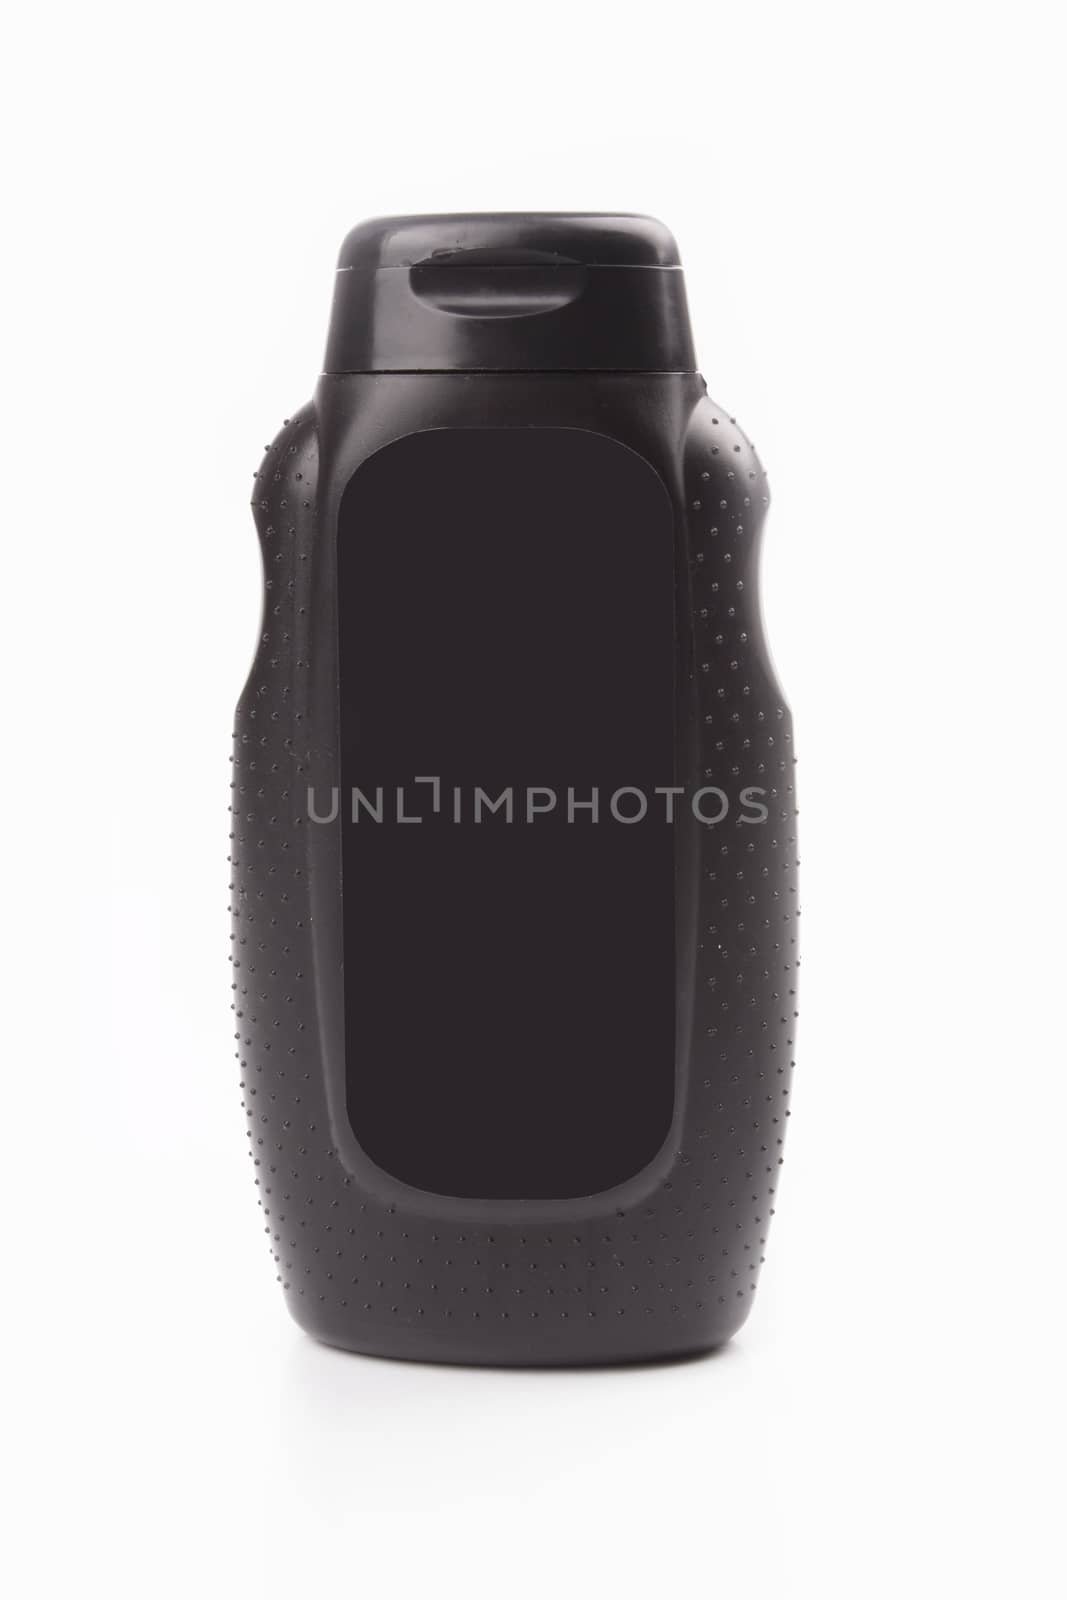 black container on a white background
